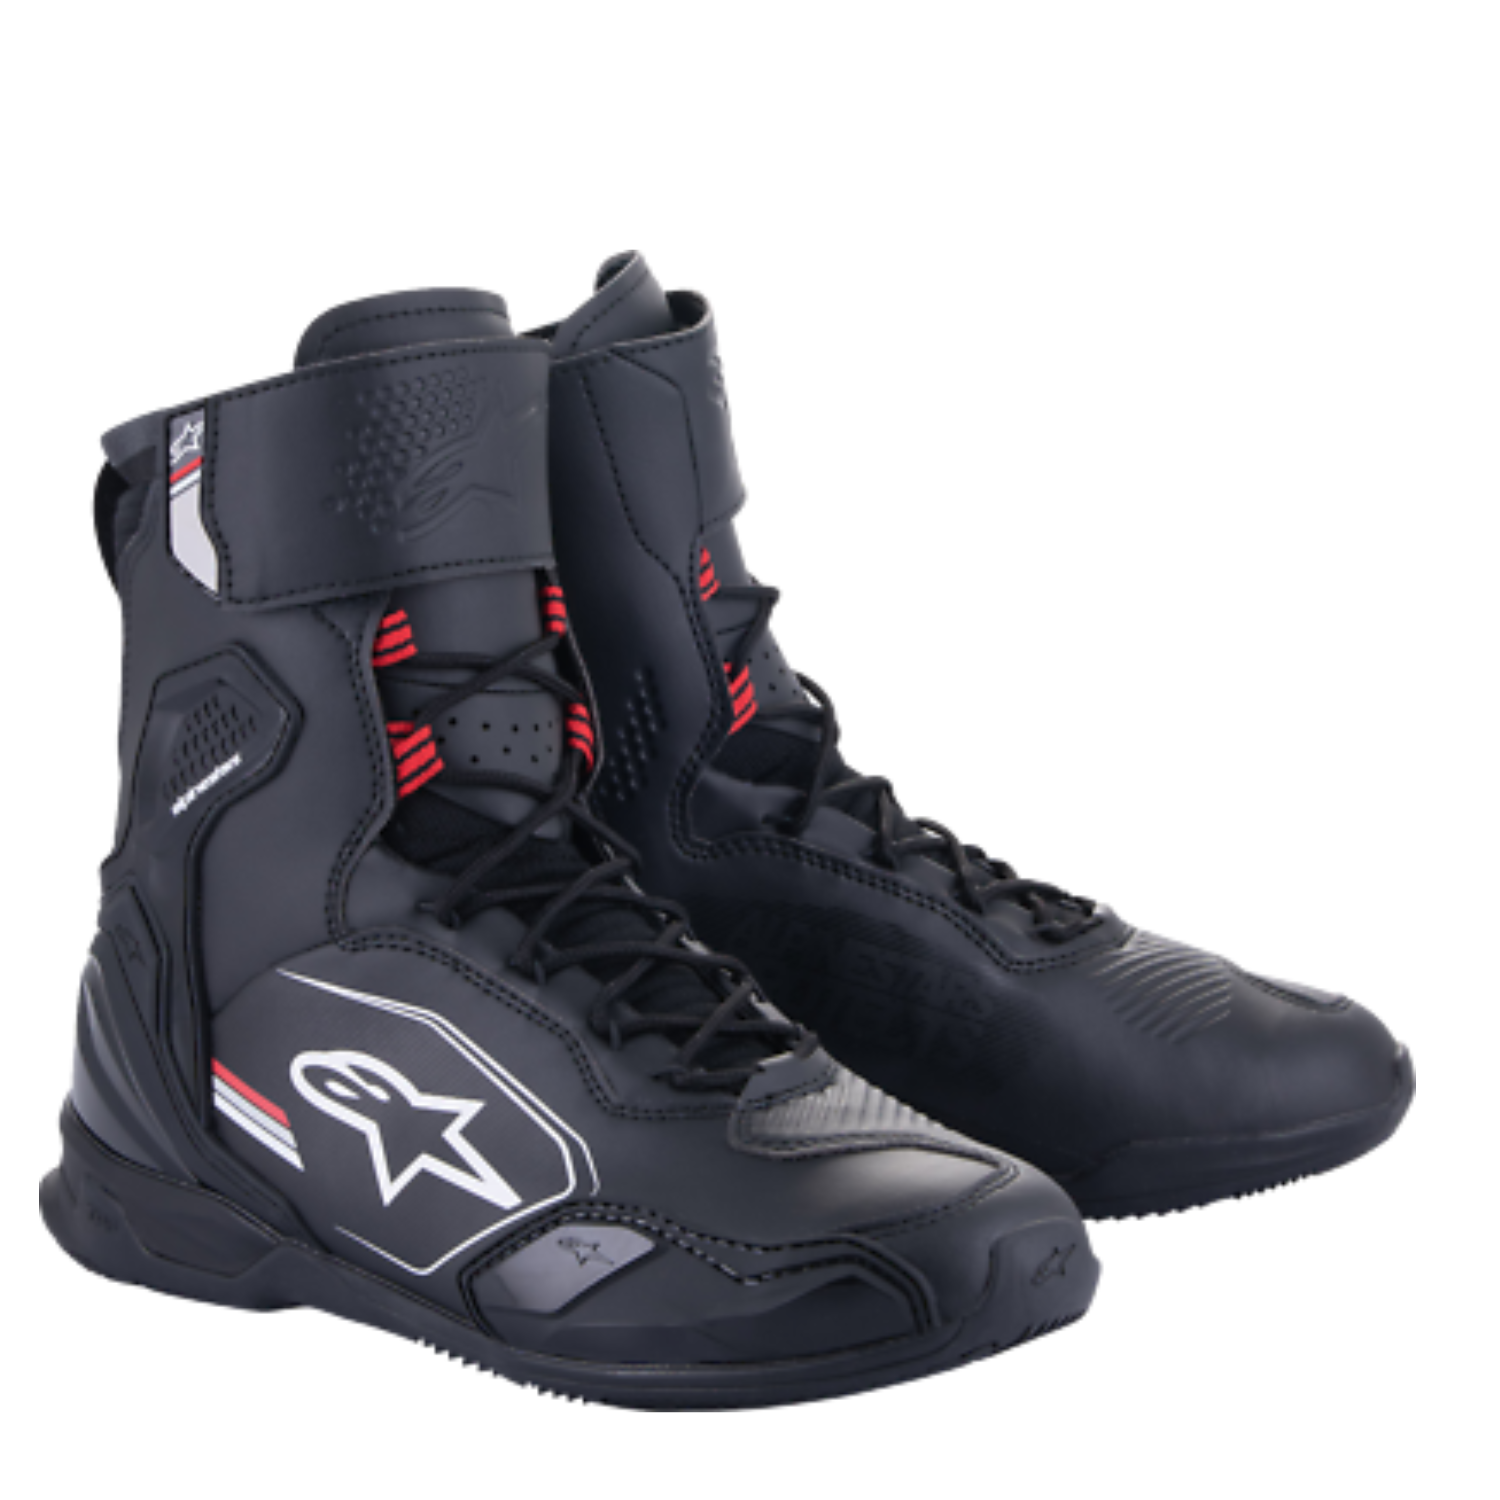 Image of Alpinestars Superfaster Shoes Black Gray Bright Red Size US 105 ID 8059347260822